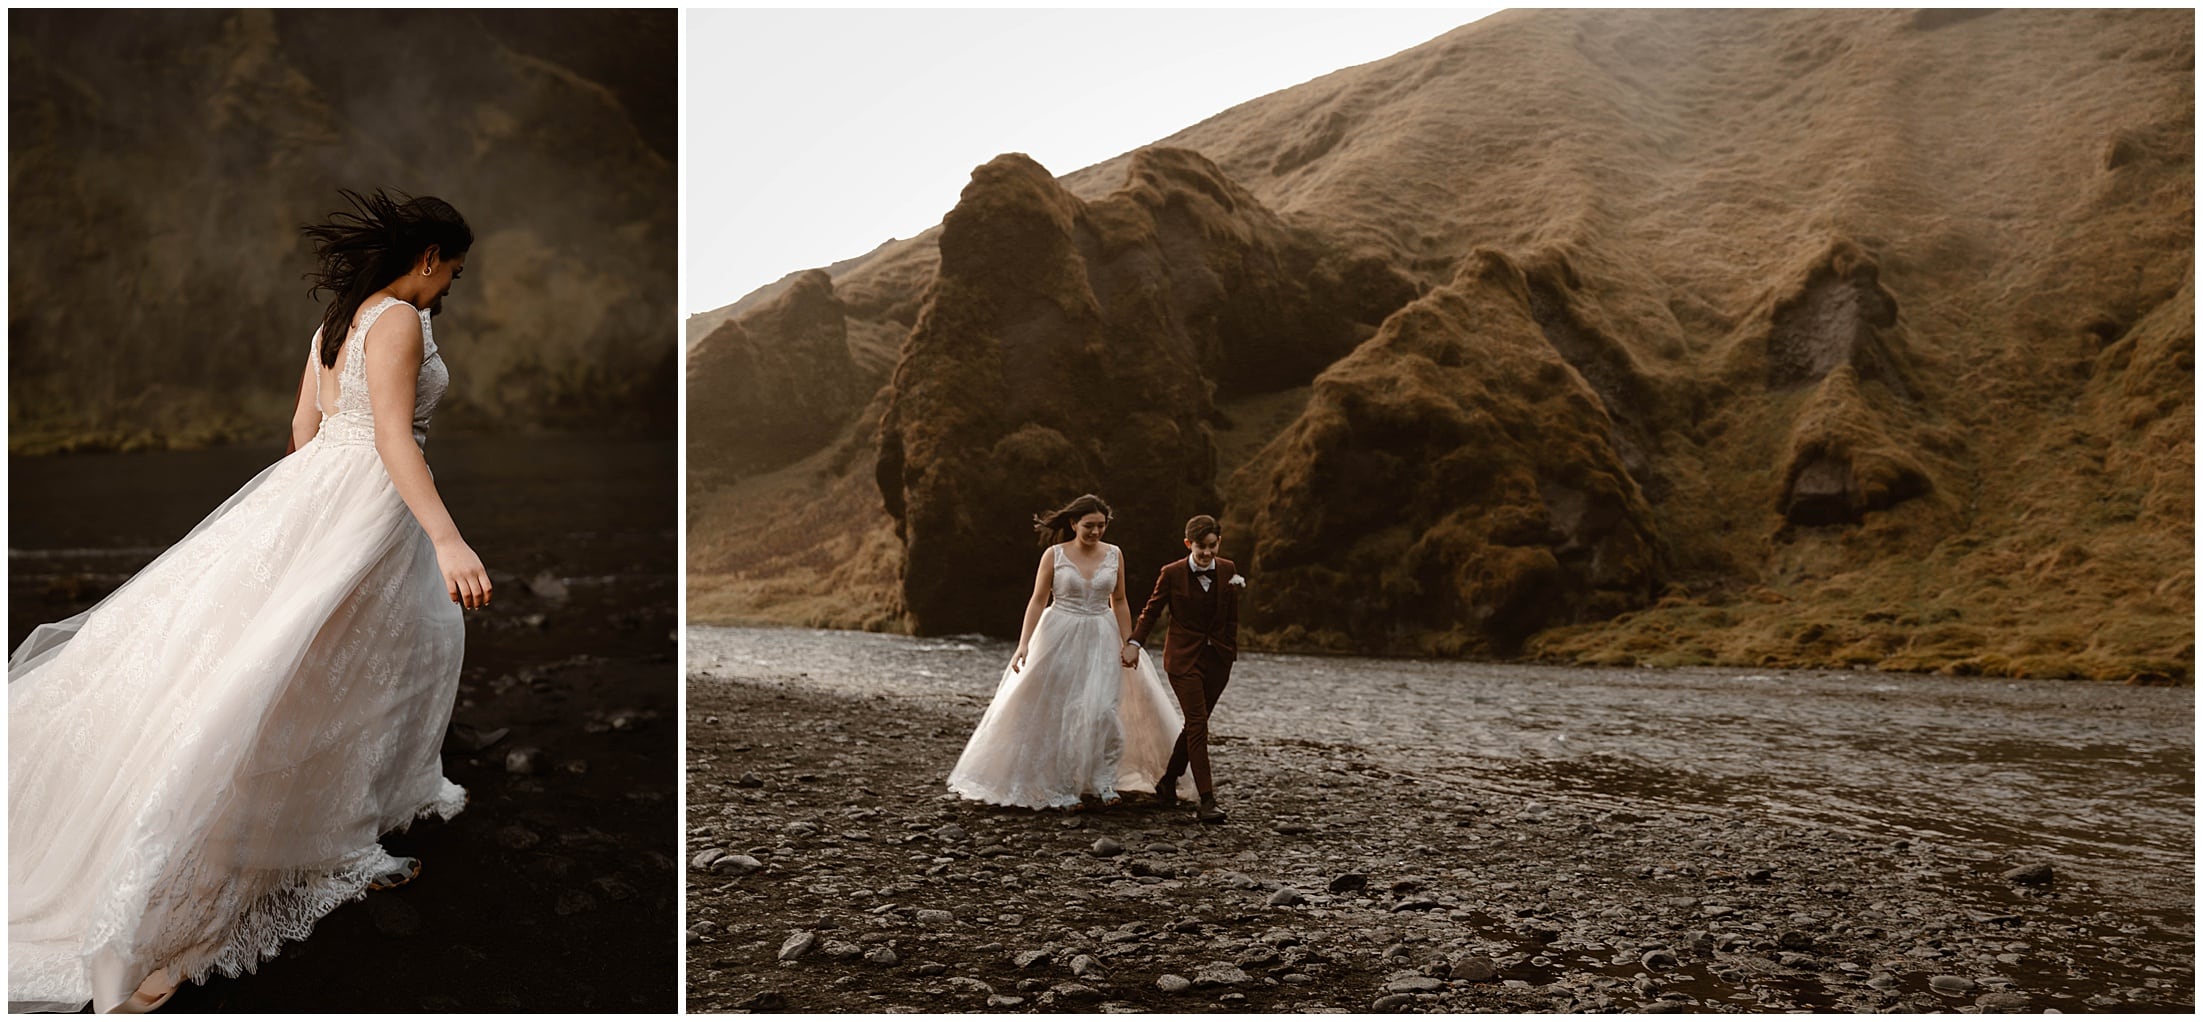 iceland elopement, how to elope in iceland, iceland elopement photographer, iceland elopement packages, how much does it cost to elope in iceland, is it easy to elope in iceland, gay marriage in iceland, cliff elopement, blacksand beach elopement, lighthouse elopement in iceland, iceland northern lights elopement, iceland elopement planner, can i elope in iceland, all inclusive elopement package, brit nicole photography, best elopement photographer, best iceland elopement photographer, affordable elopement photographer